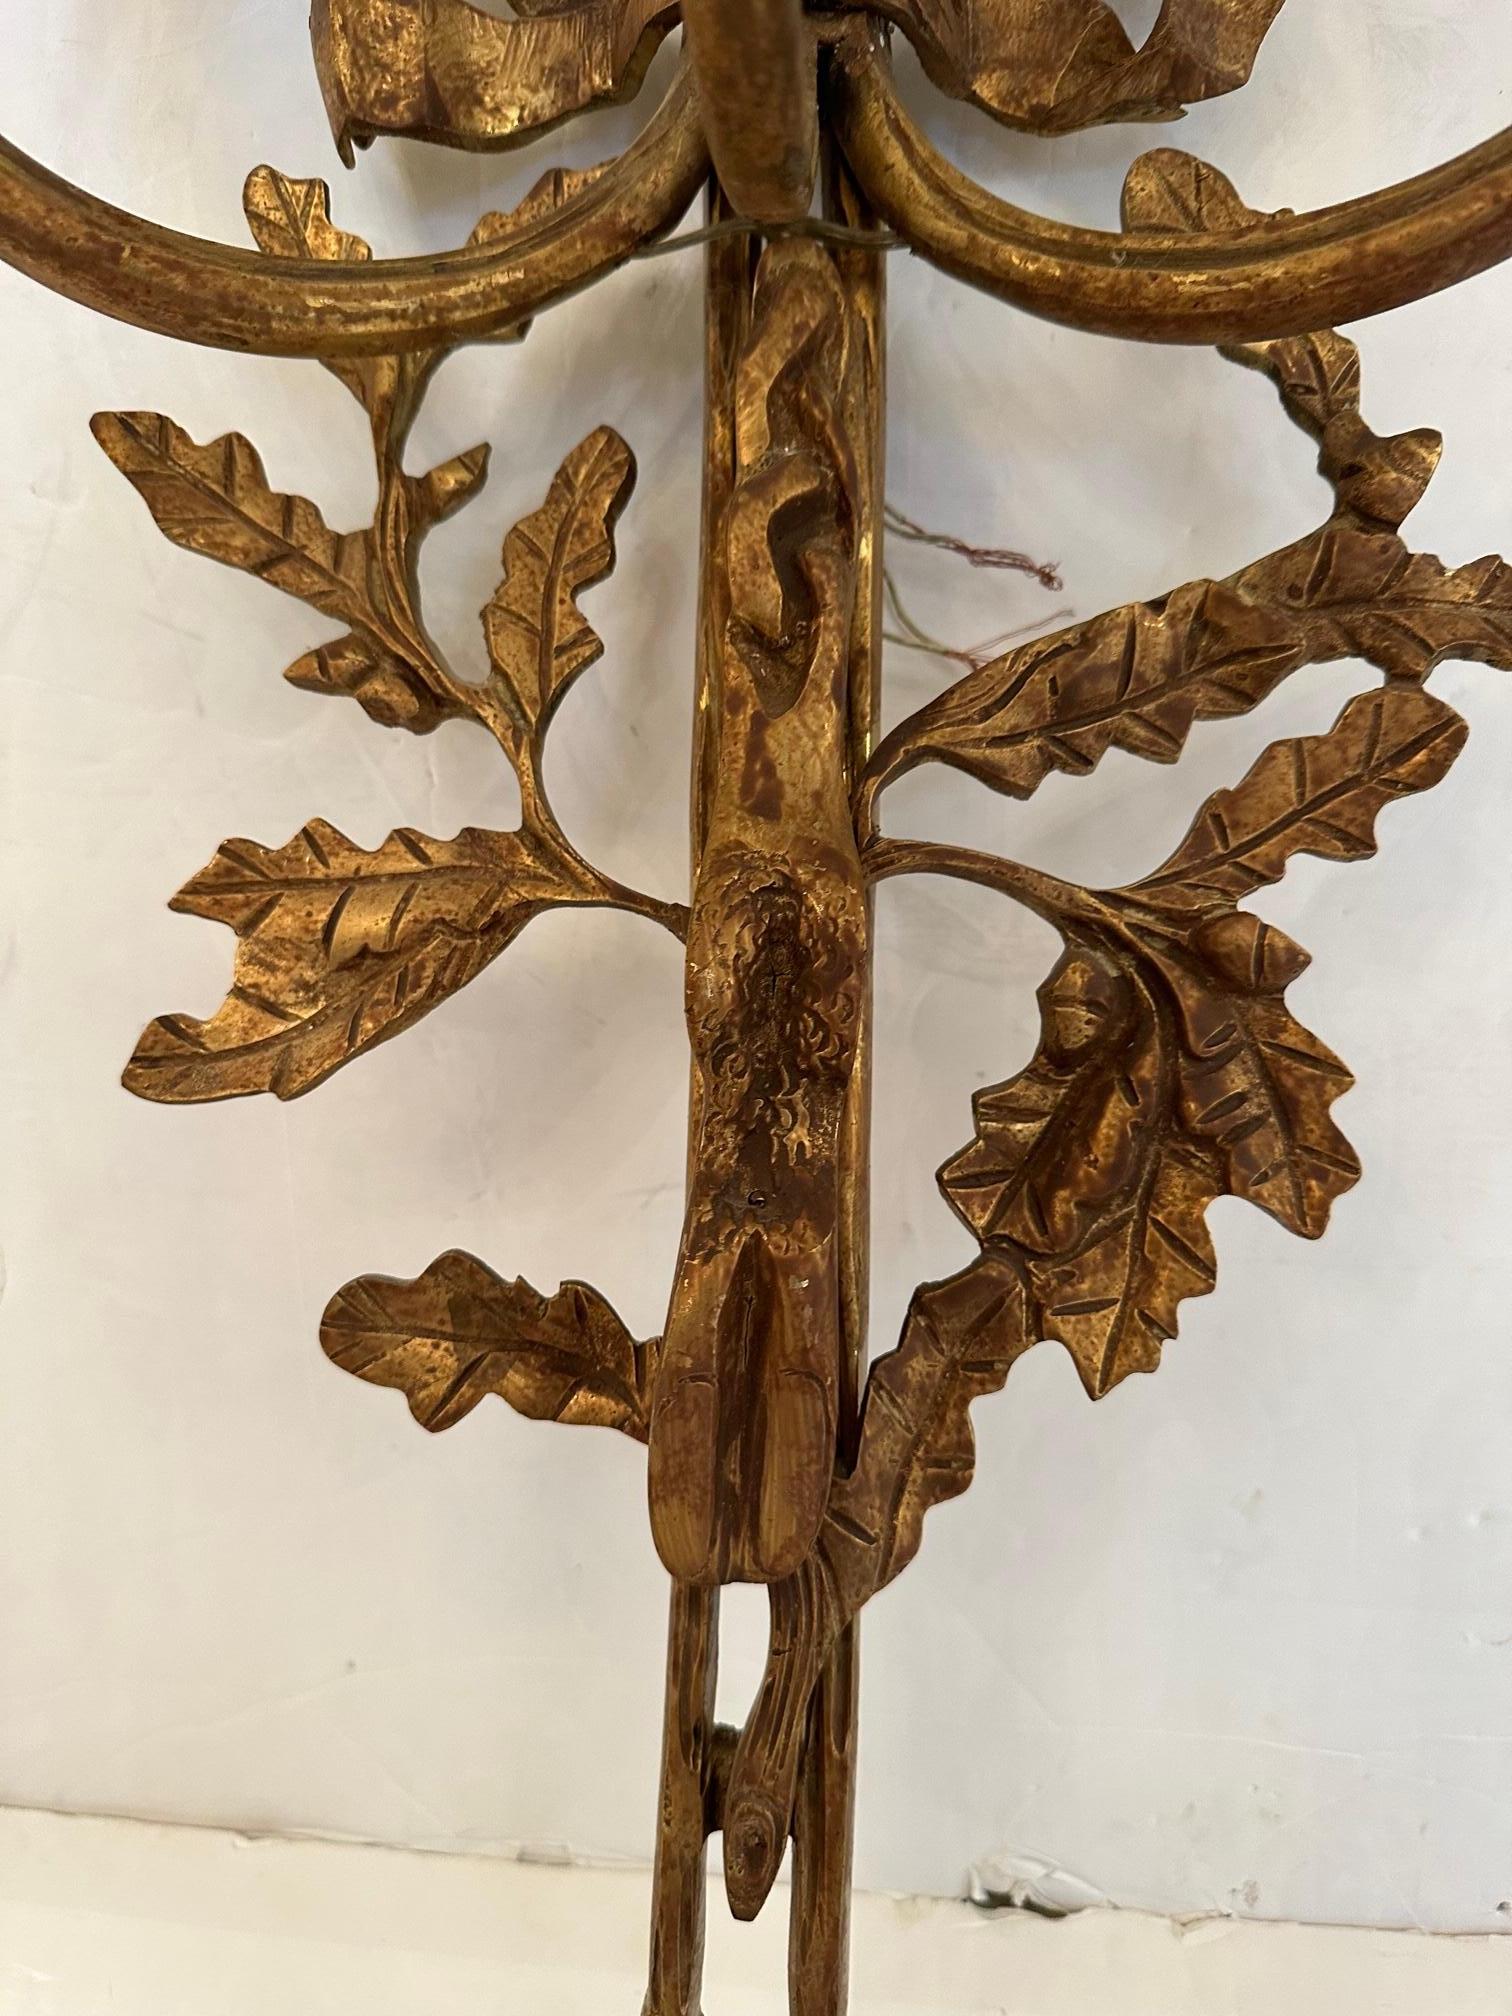 Very pretty large French aged brass wall sconces having 3 lights each and intricate details such as bows and carved foliage.  Brass has been treated to look antique.